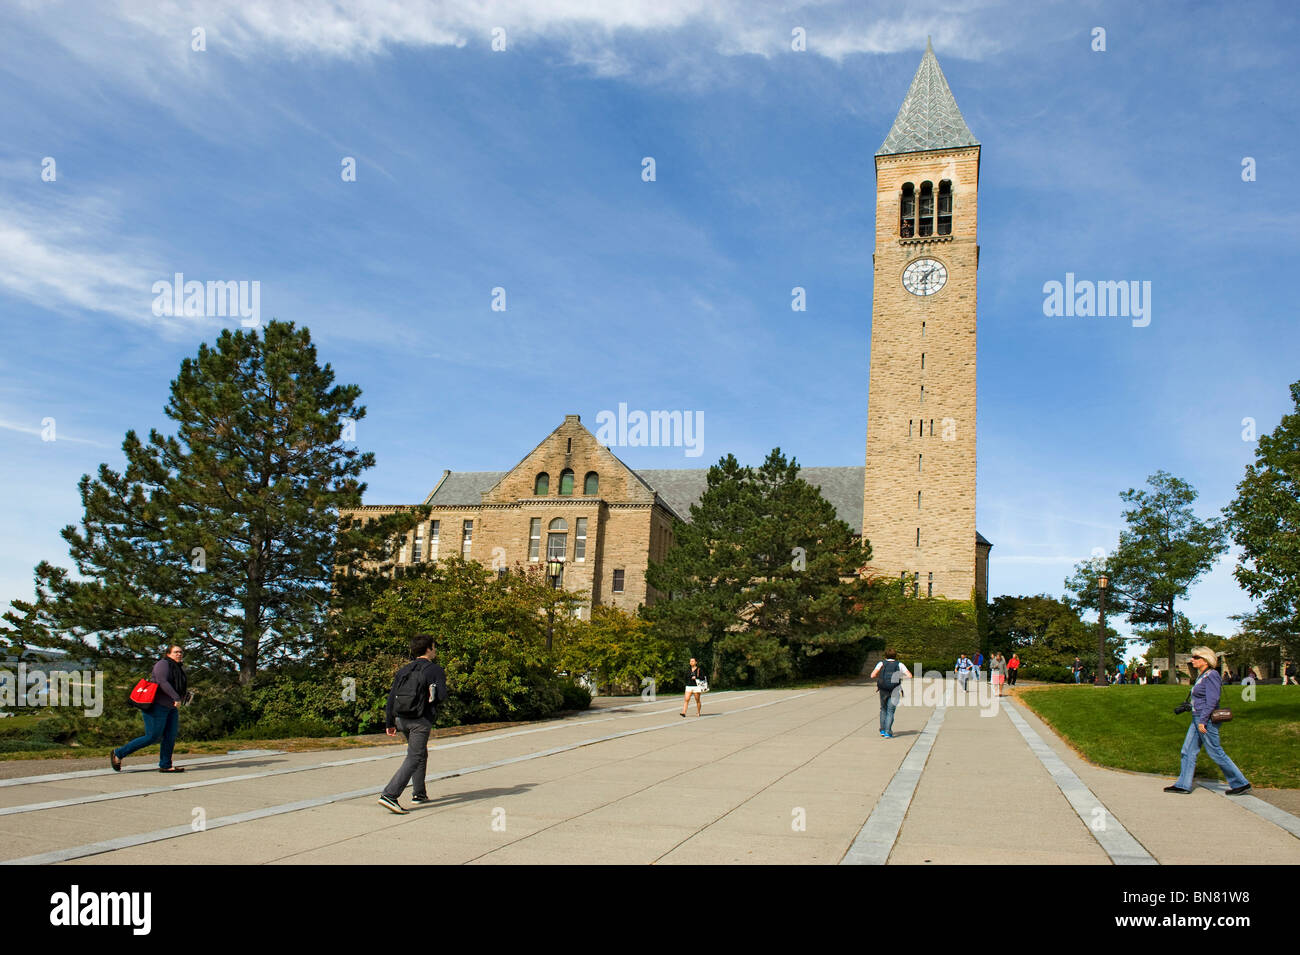 McGraw Tower and Chimes Cornell University Campus Ithaca New York Finger Lakes Region Stock Photo